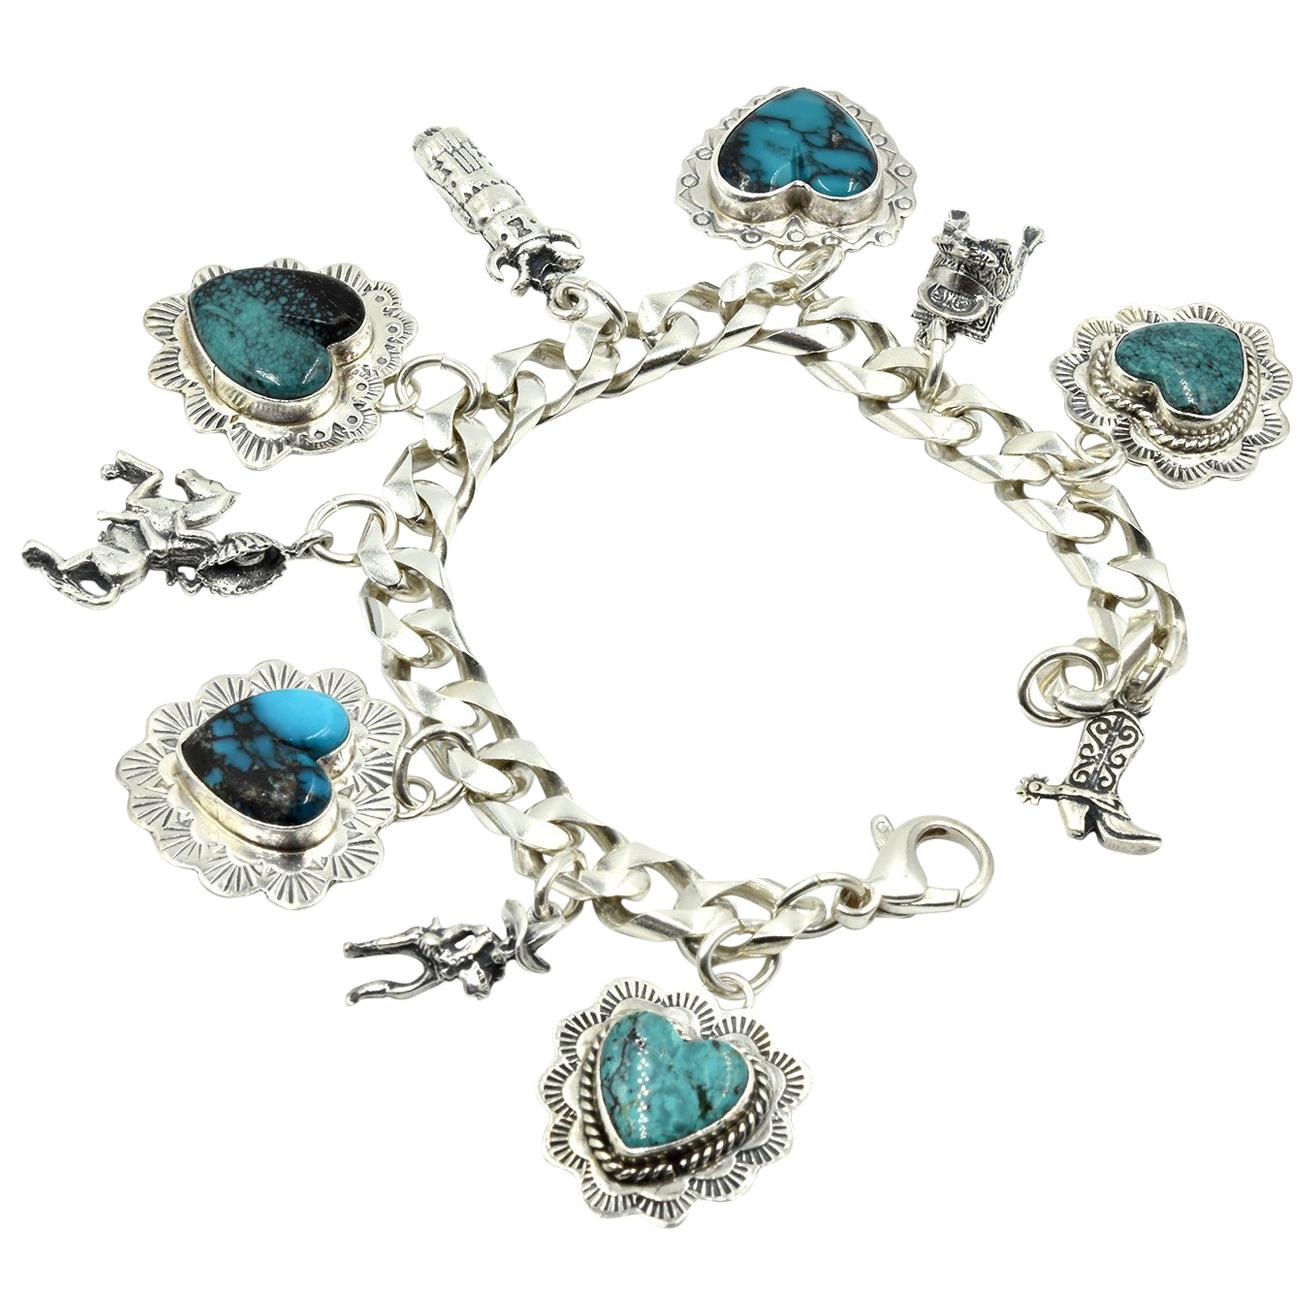 EGK Jewelry Sterling Silver Turquoise Charm Bracelet